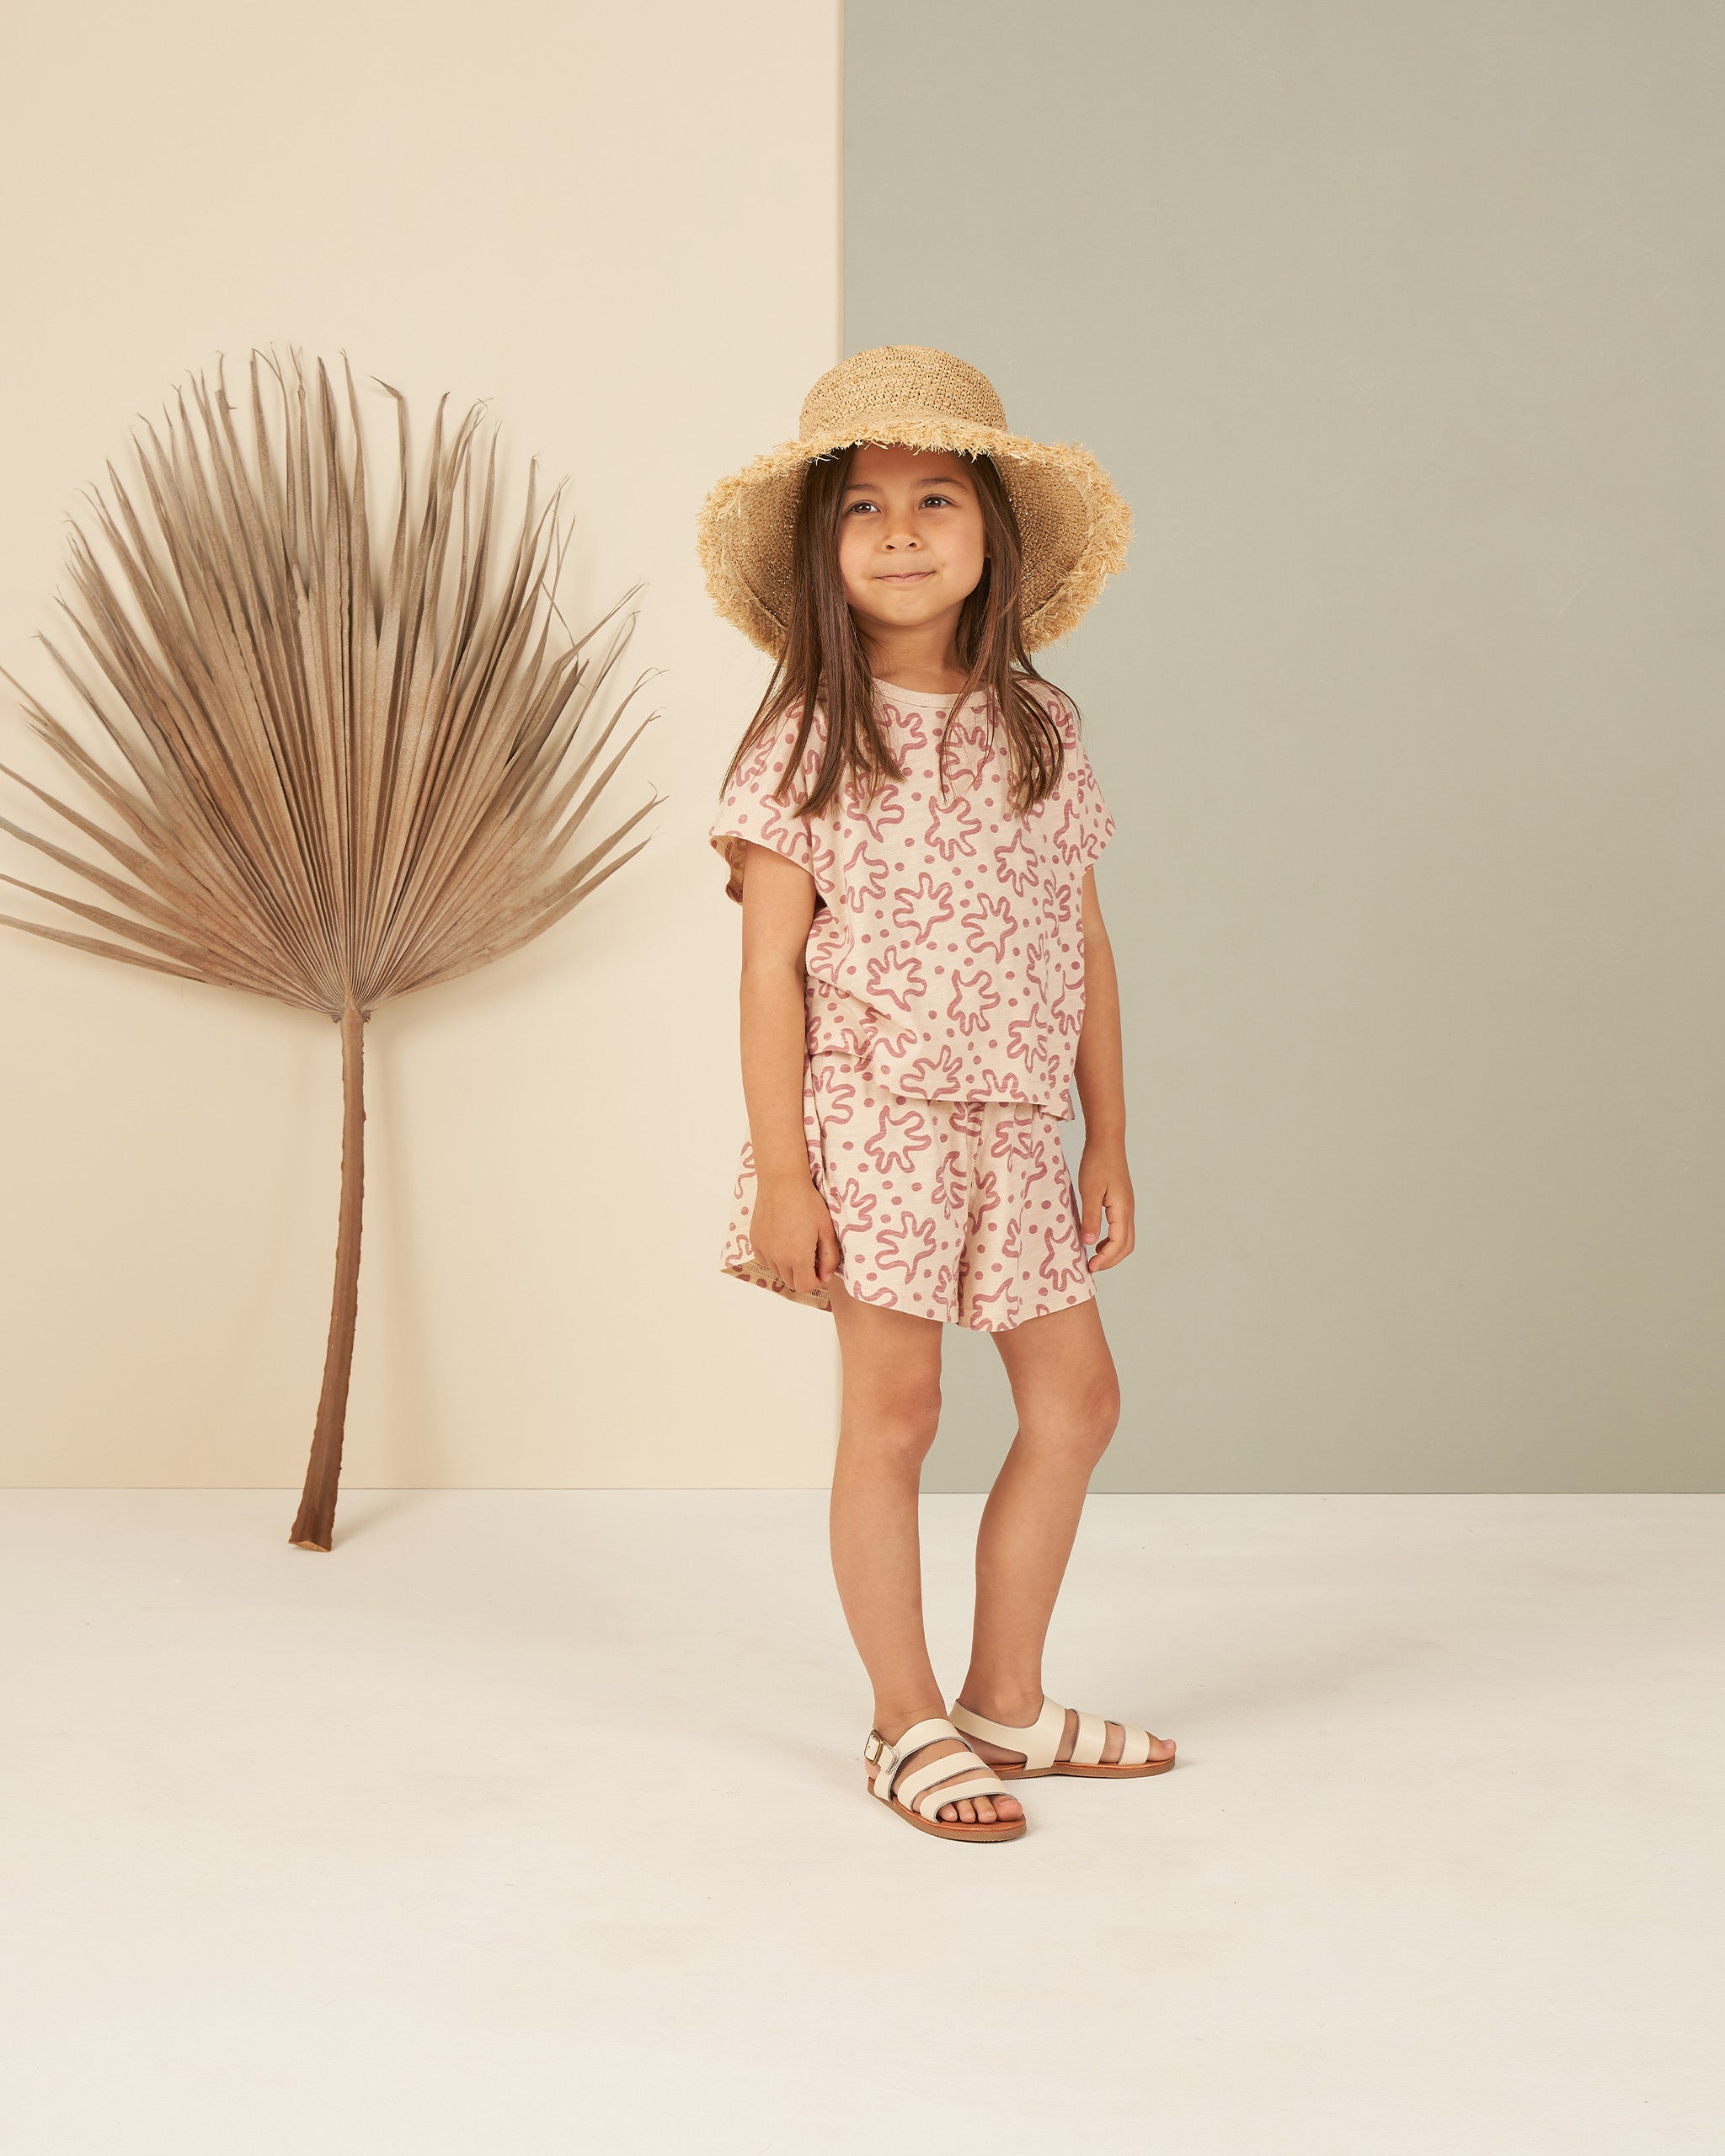 Girls Clothes - Buy Baby Girl Trendy Clothing Online In India